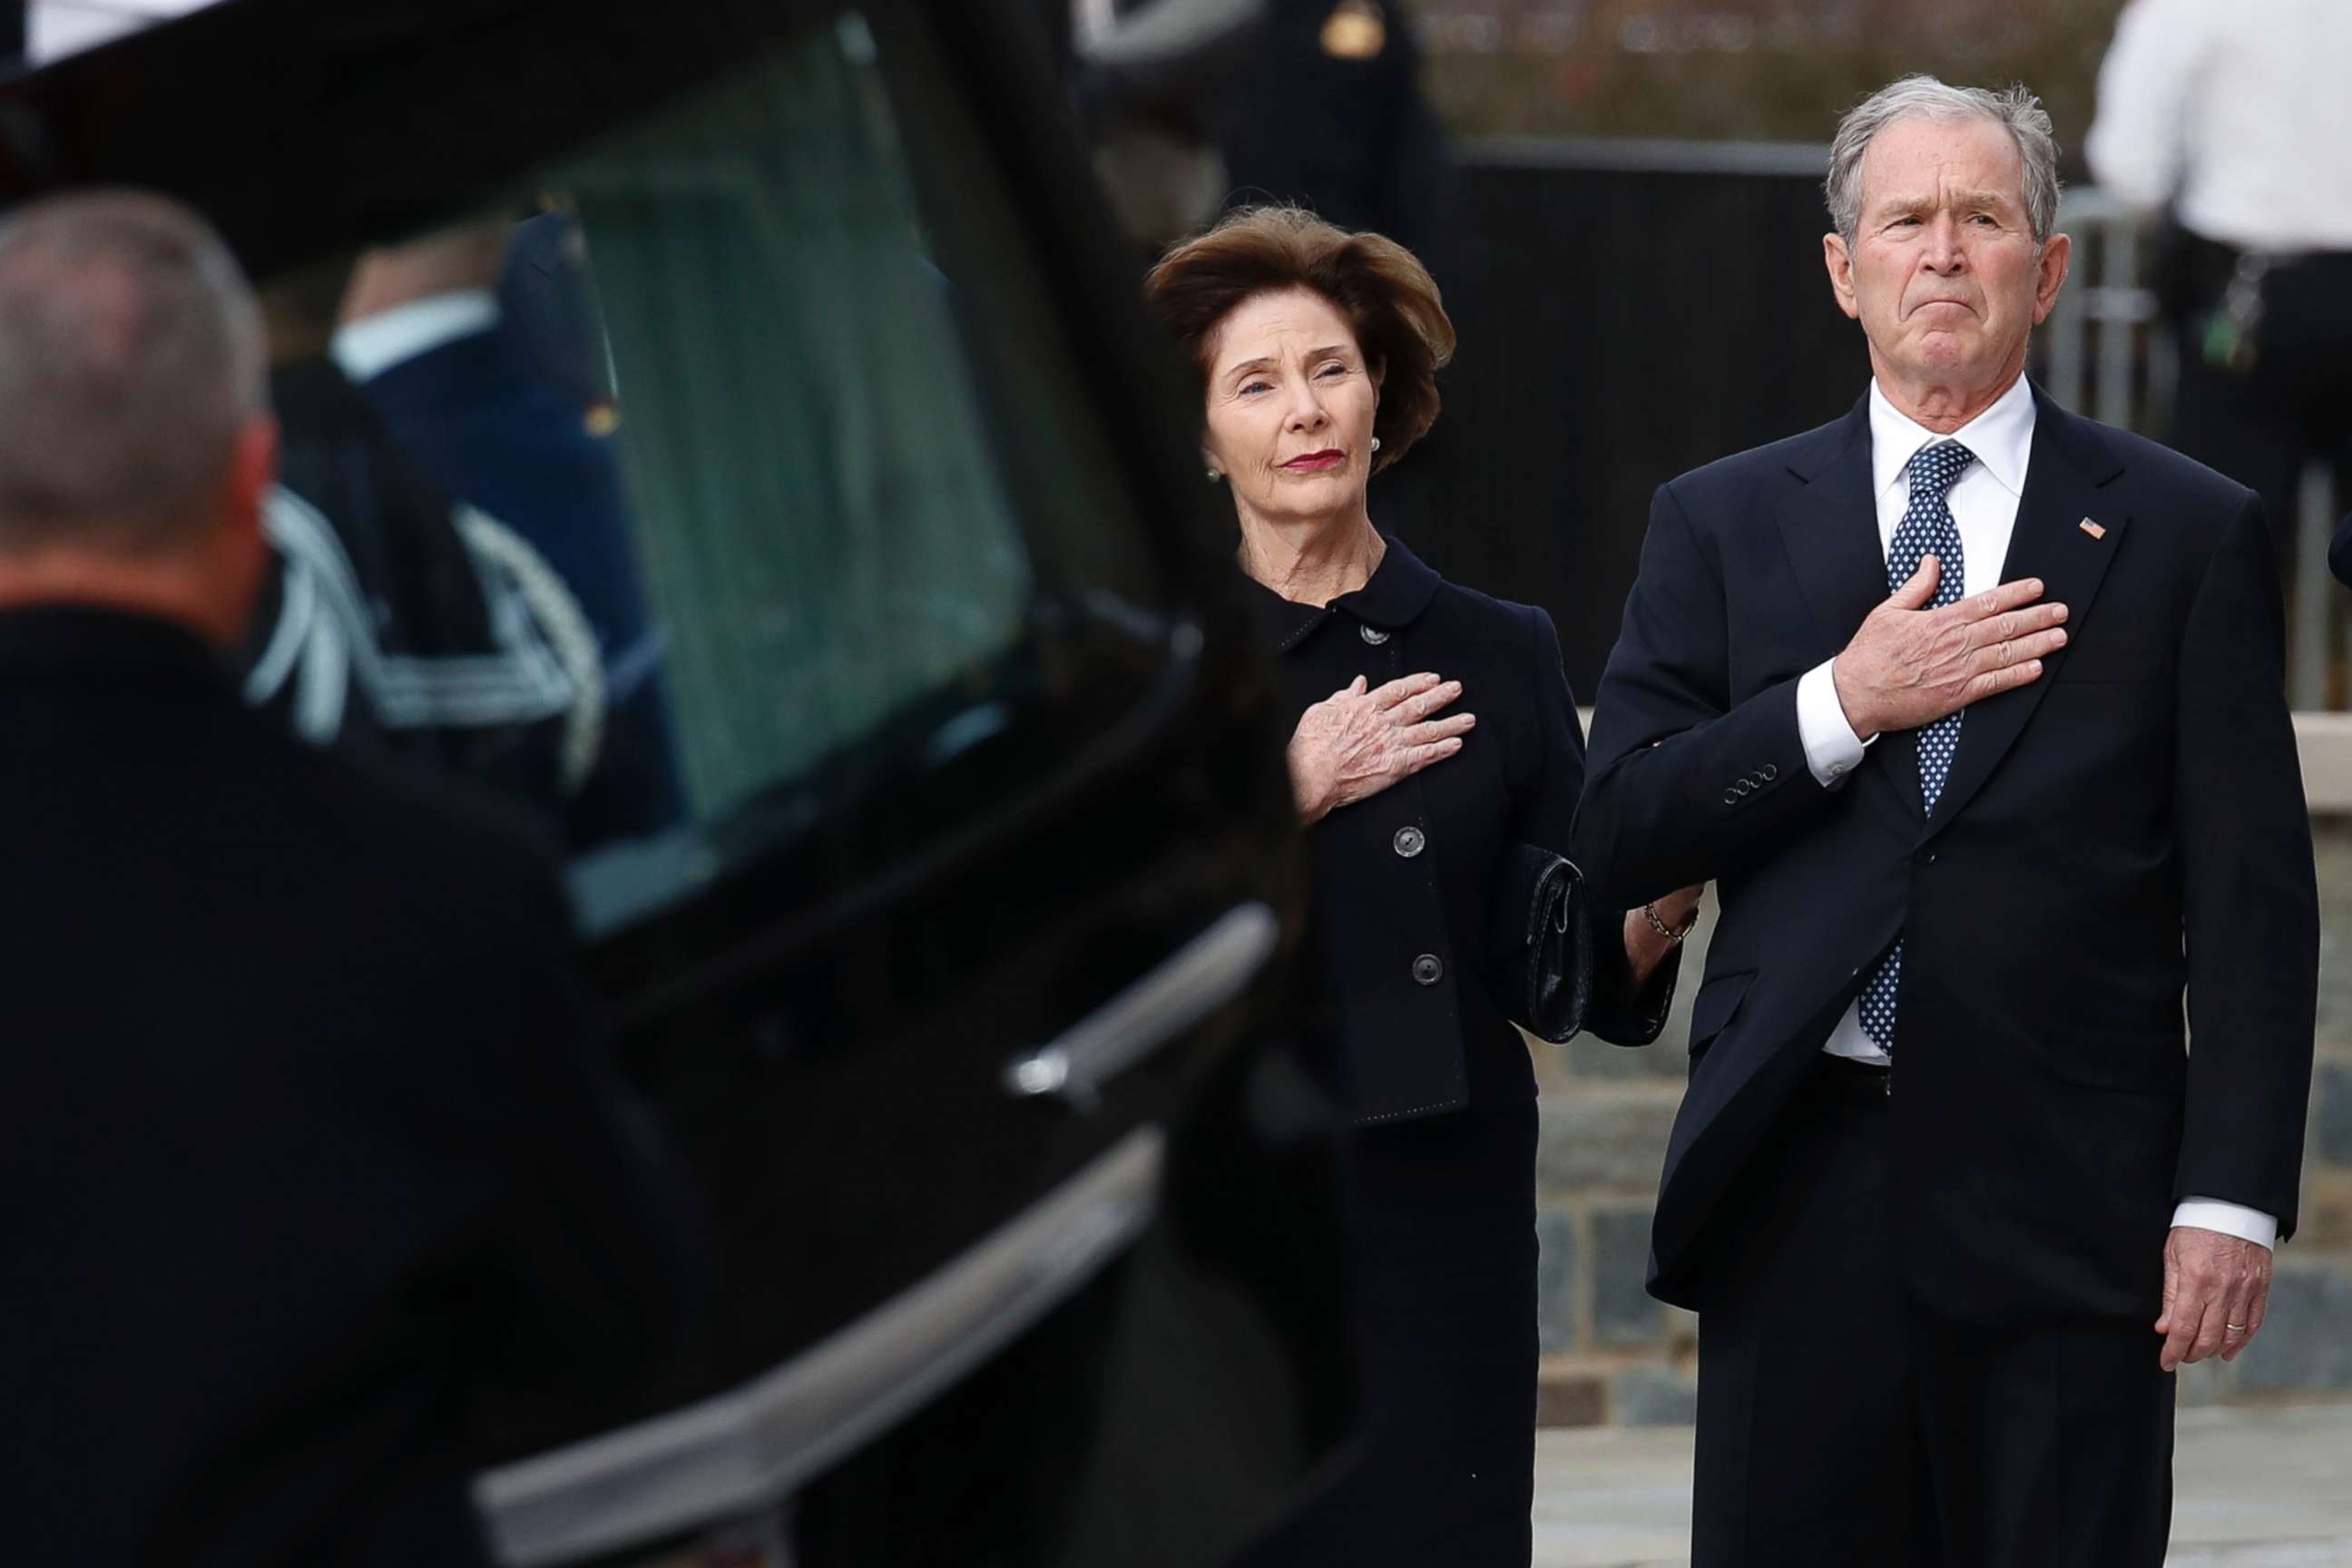 PHOTO: Former President George W. Bush and former first lady Laura Bush watch as the flag-draped casket of former President George H.W. Bush is carried to a State Funeral at the National Cathedral, Dec. 5, 2018 in Washington.